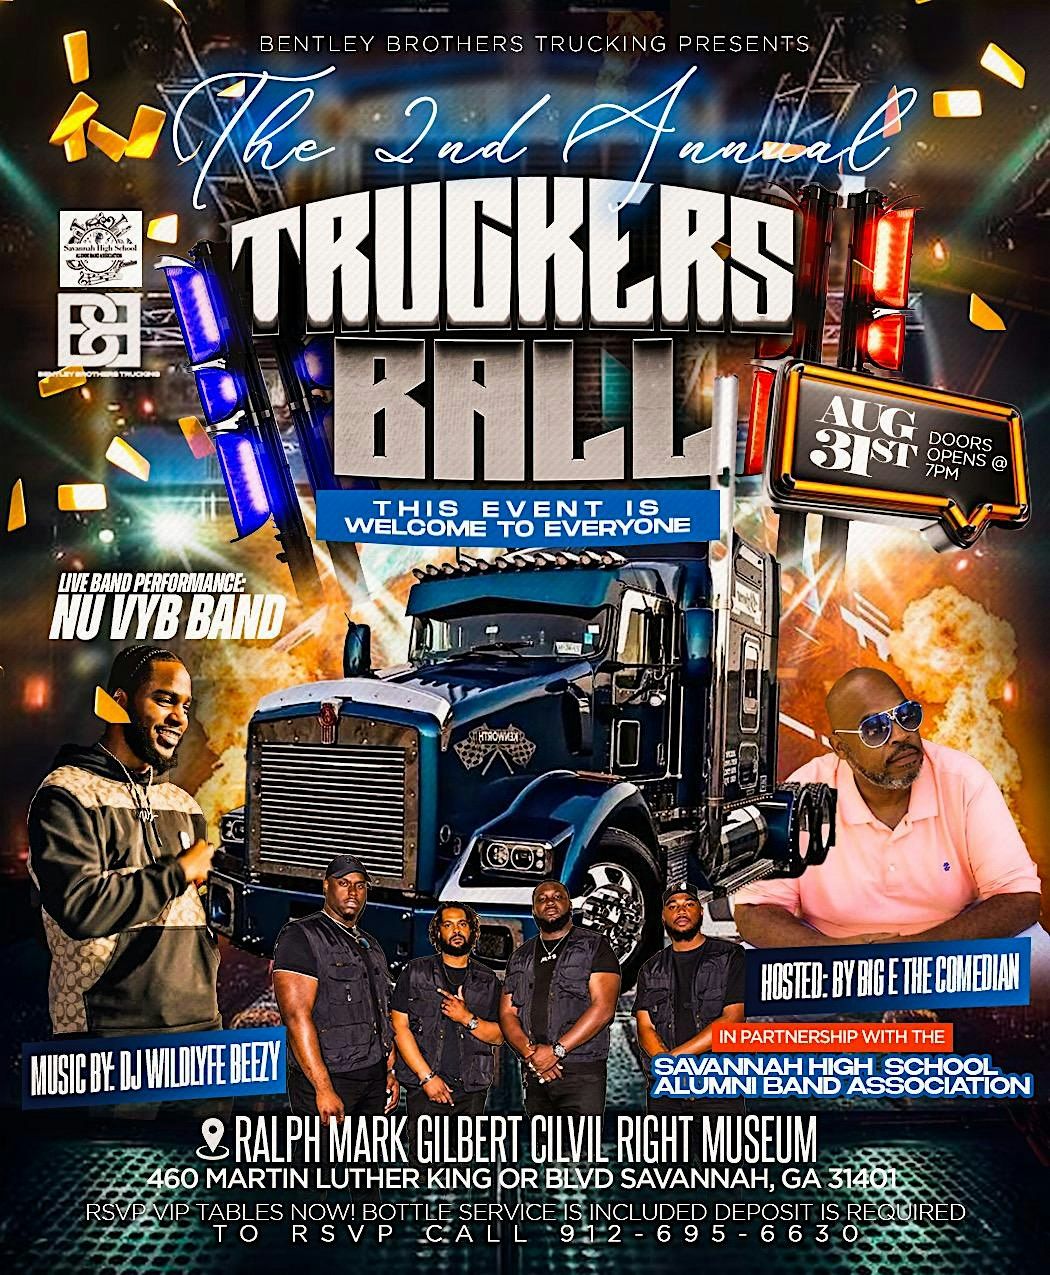 The 2nd Annual Truckers Ball